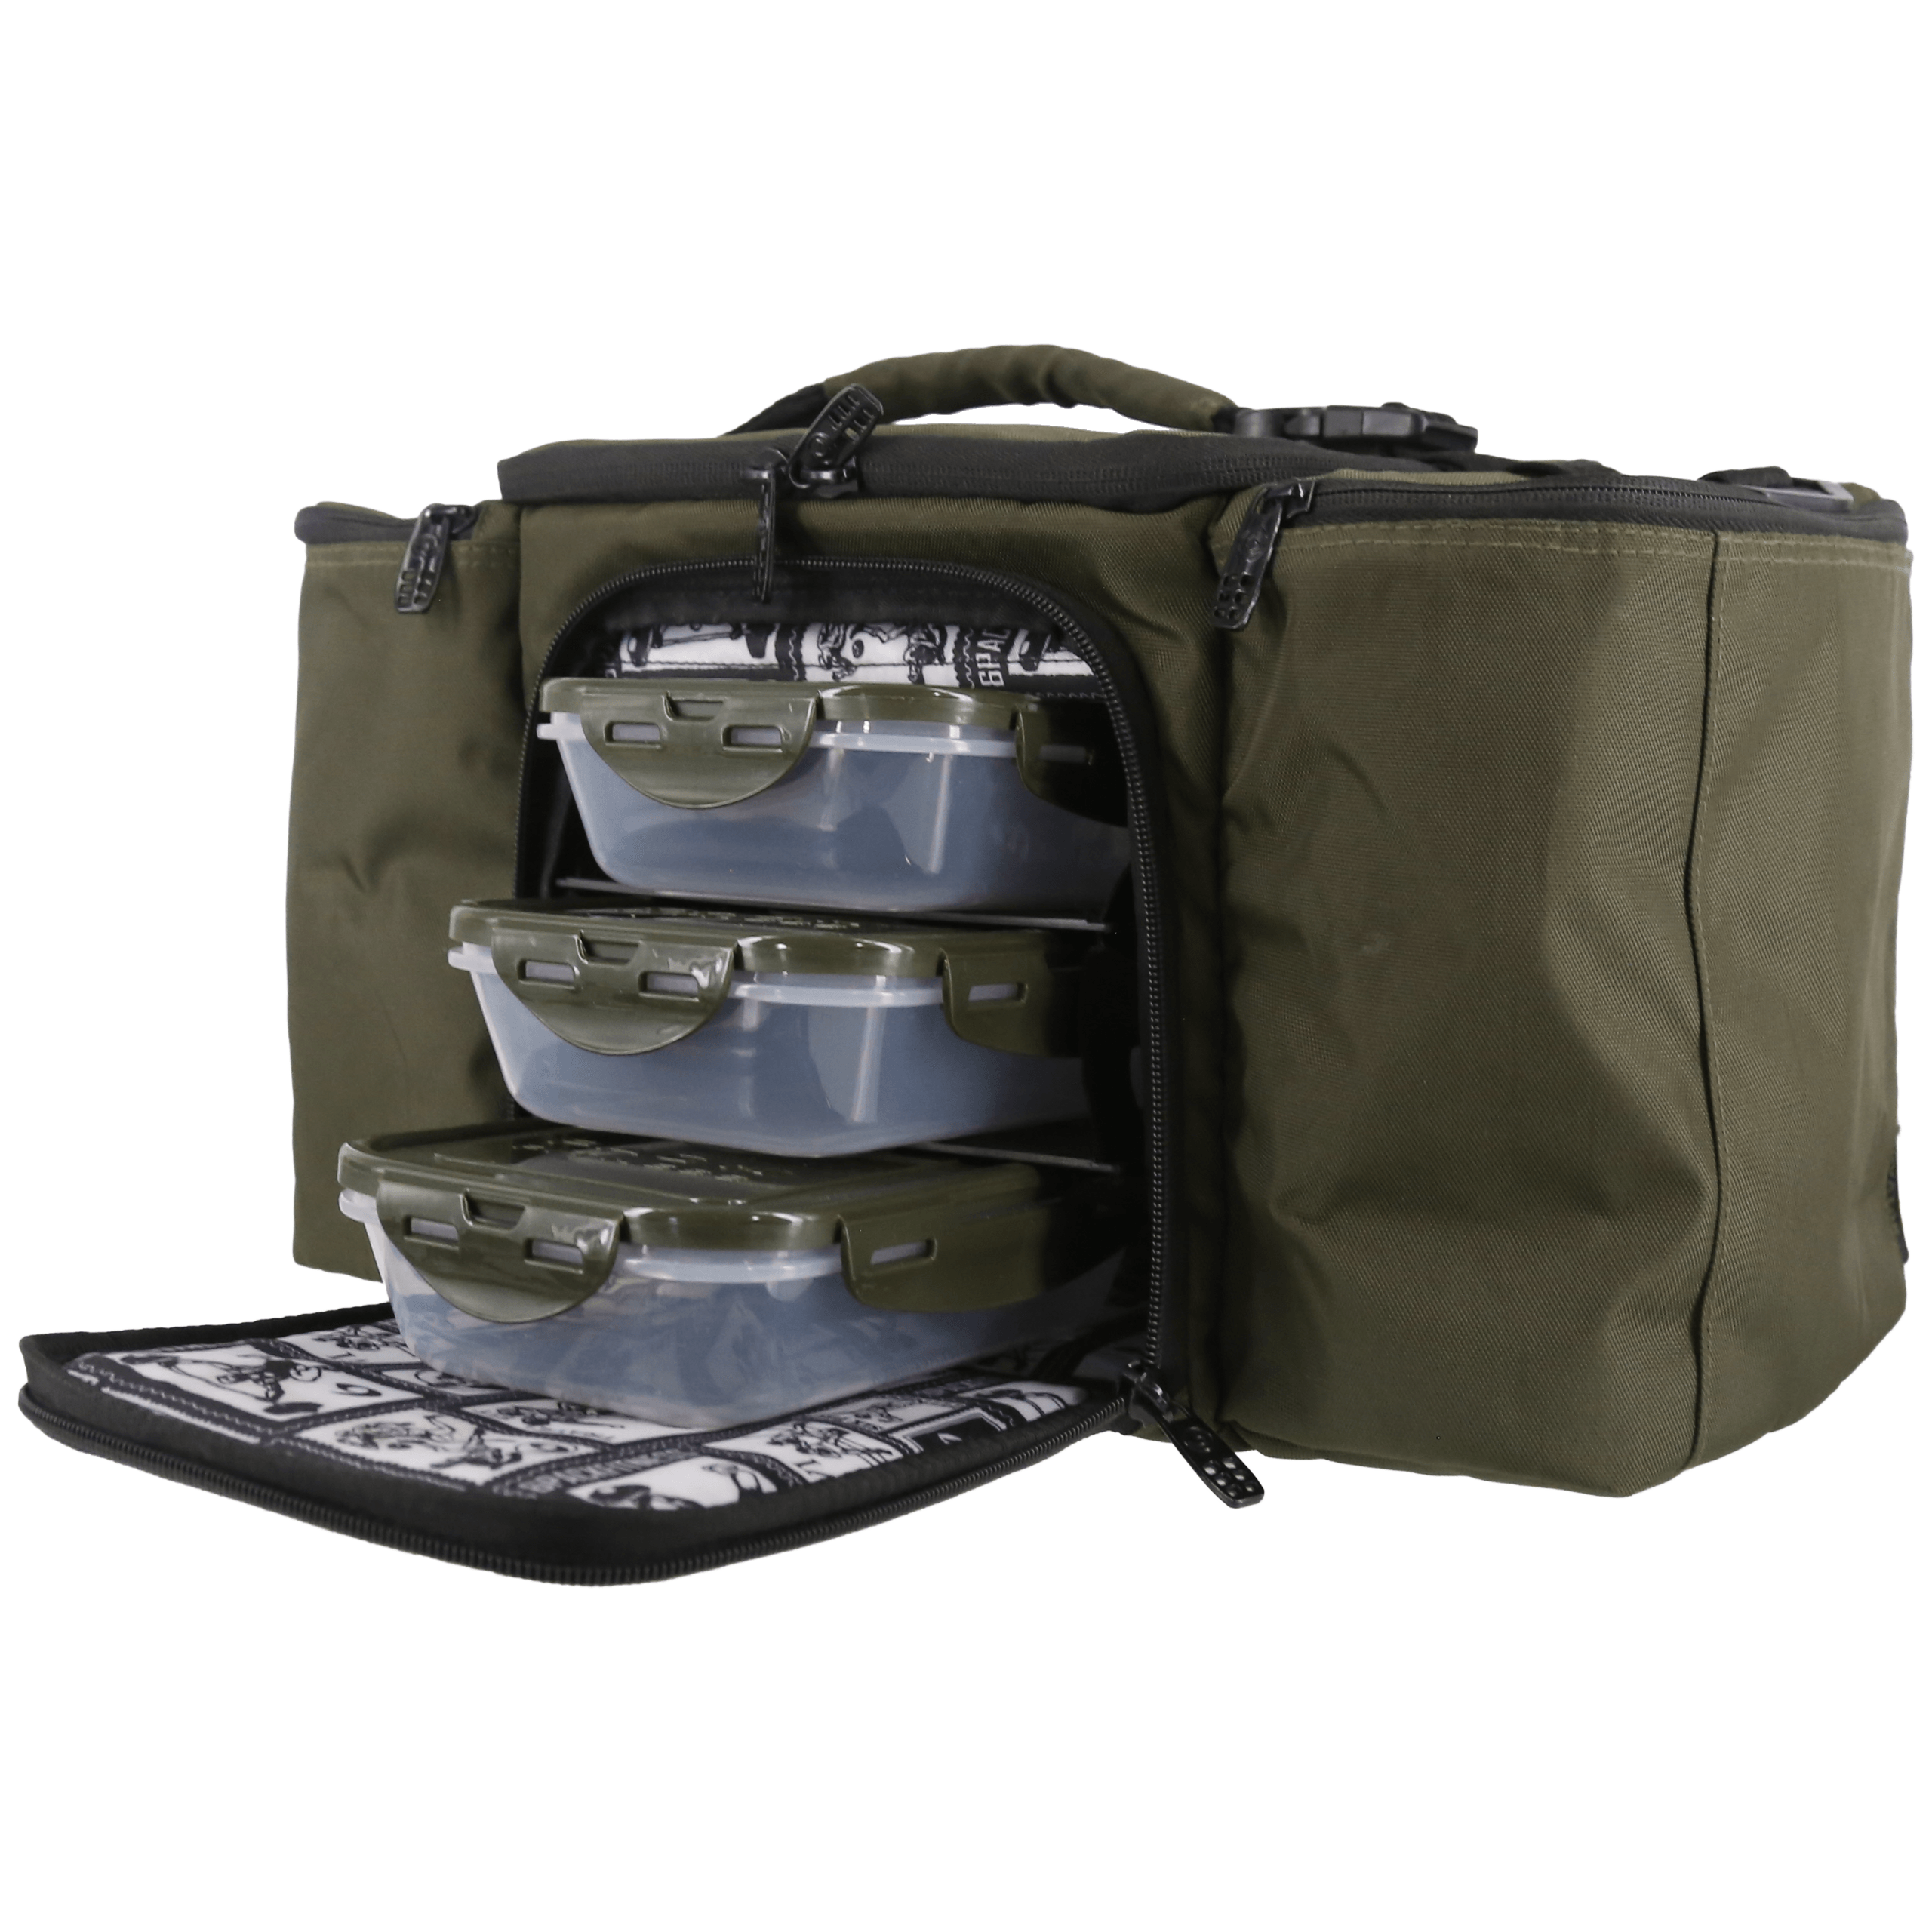 Innovator 300 Meal Prep Management Tote 4 - Meal (Olive) - sixpackbags